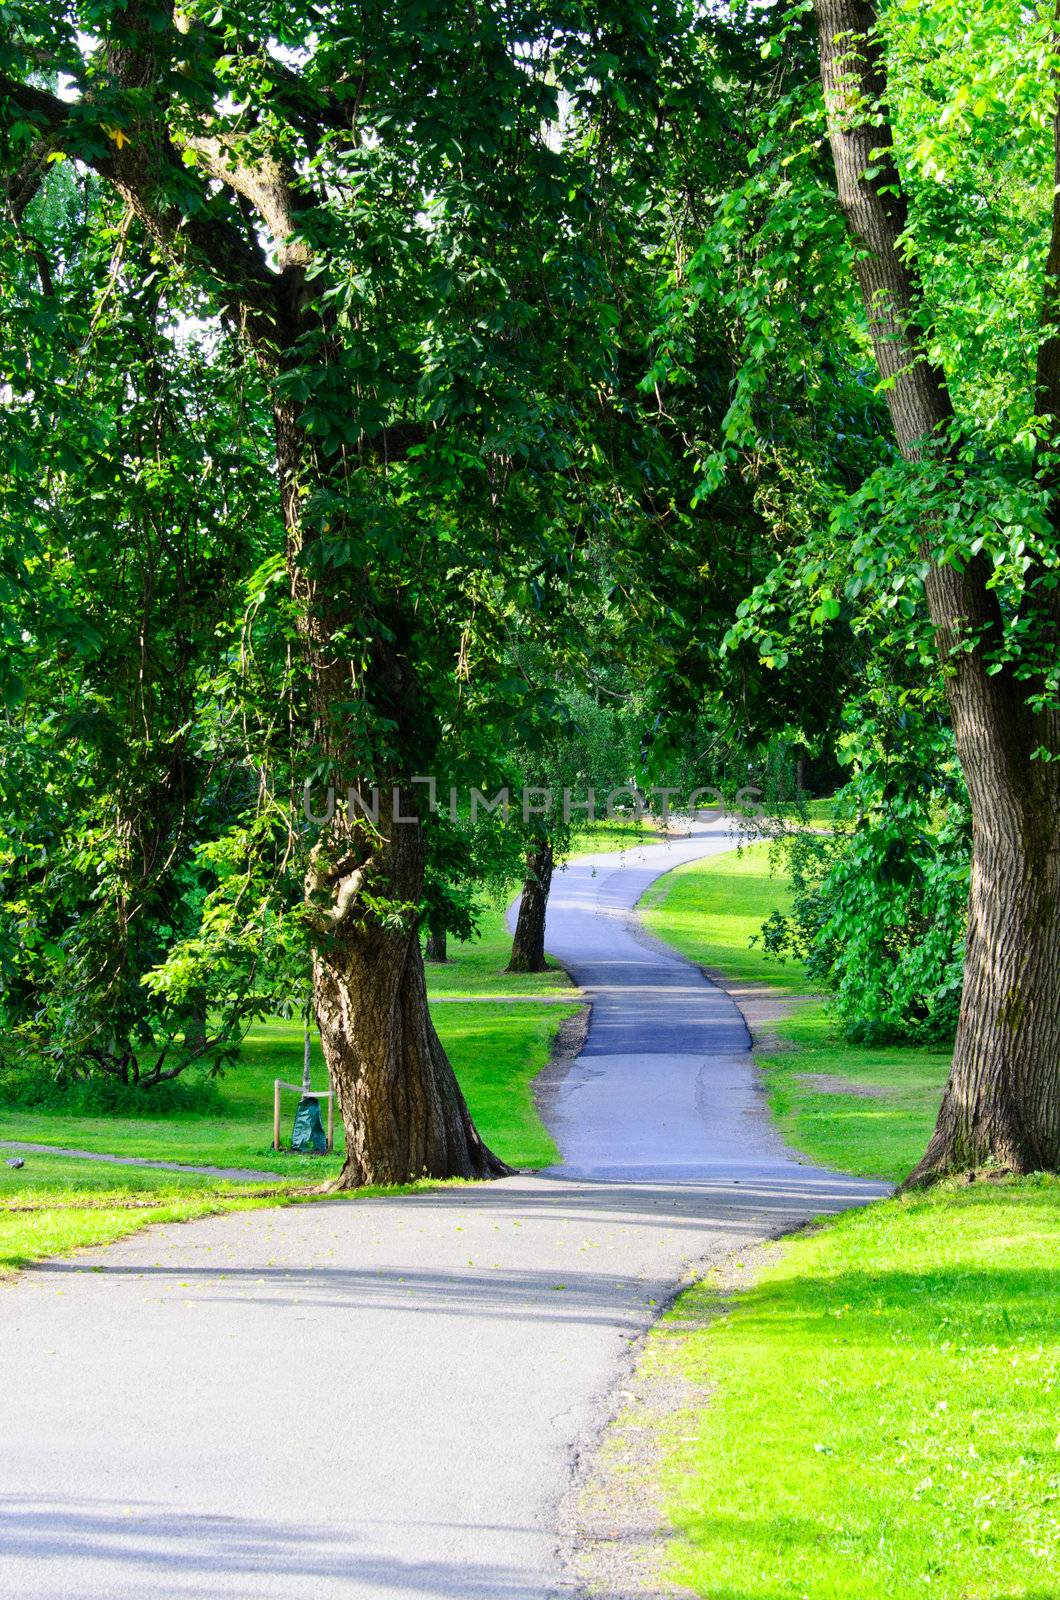 Long pathway into the garden of trees